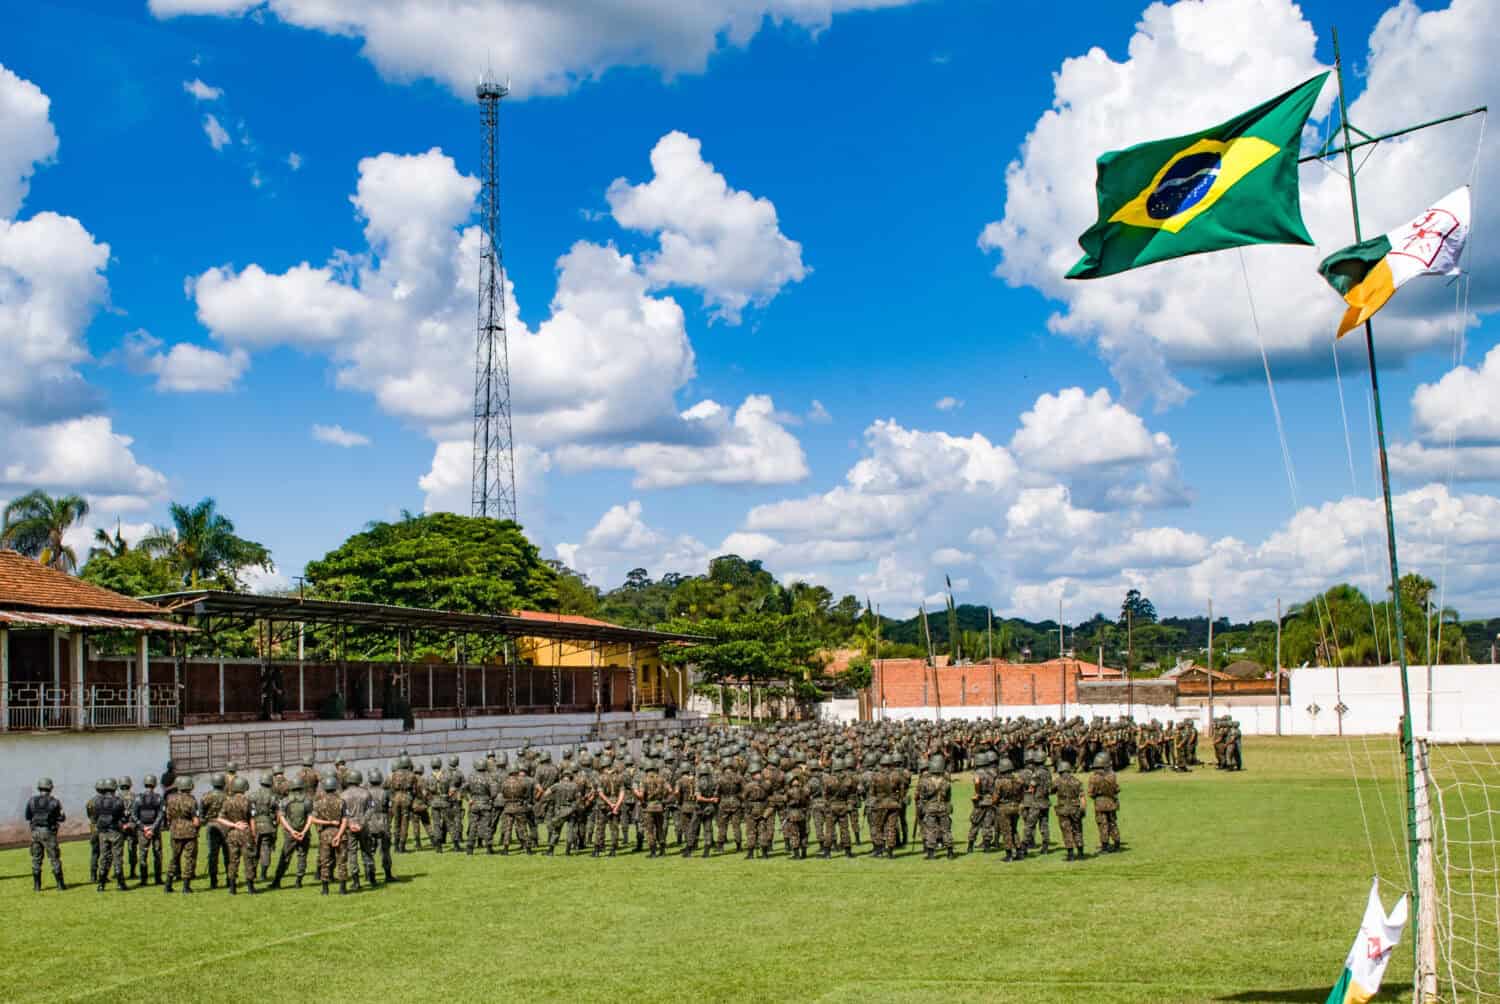 Brazilian Army gathered in a soccer camp.